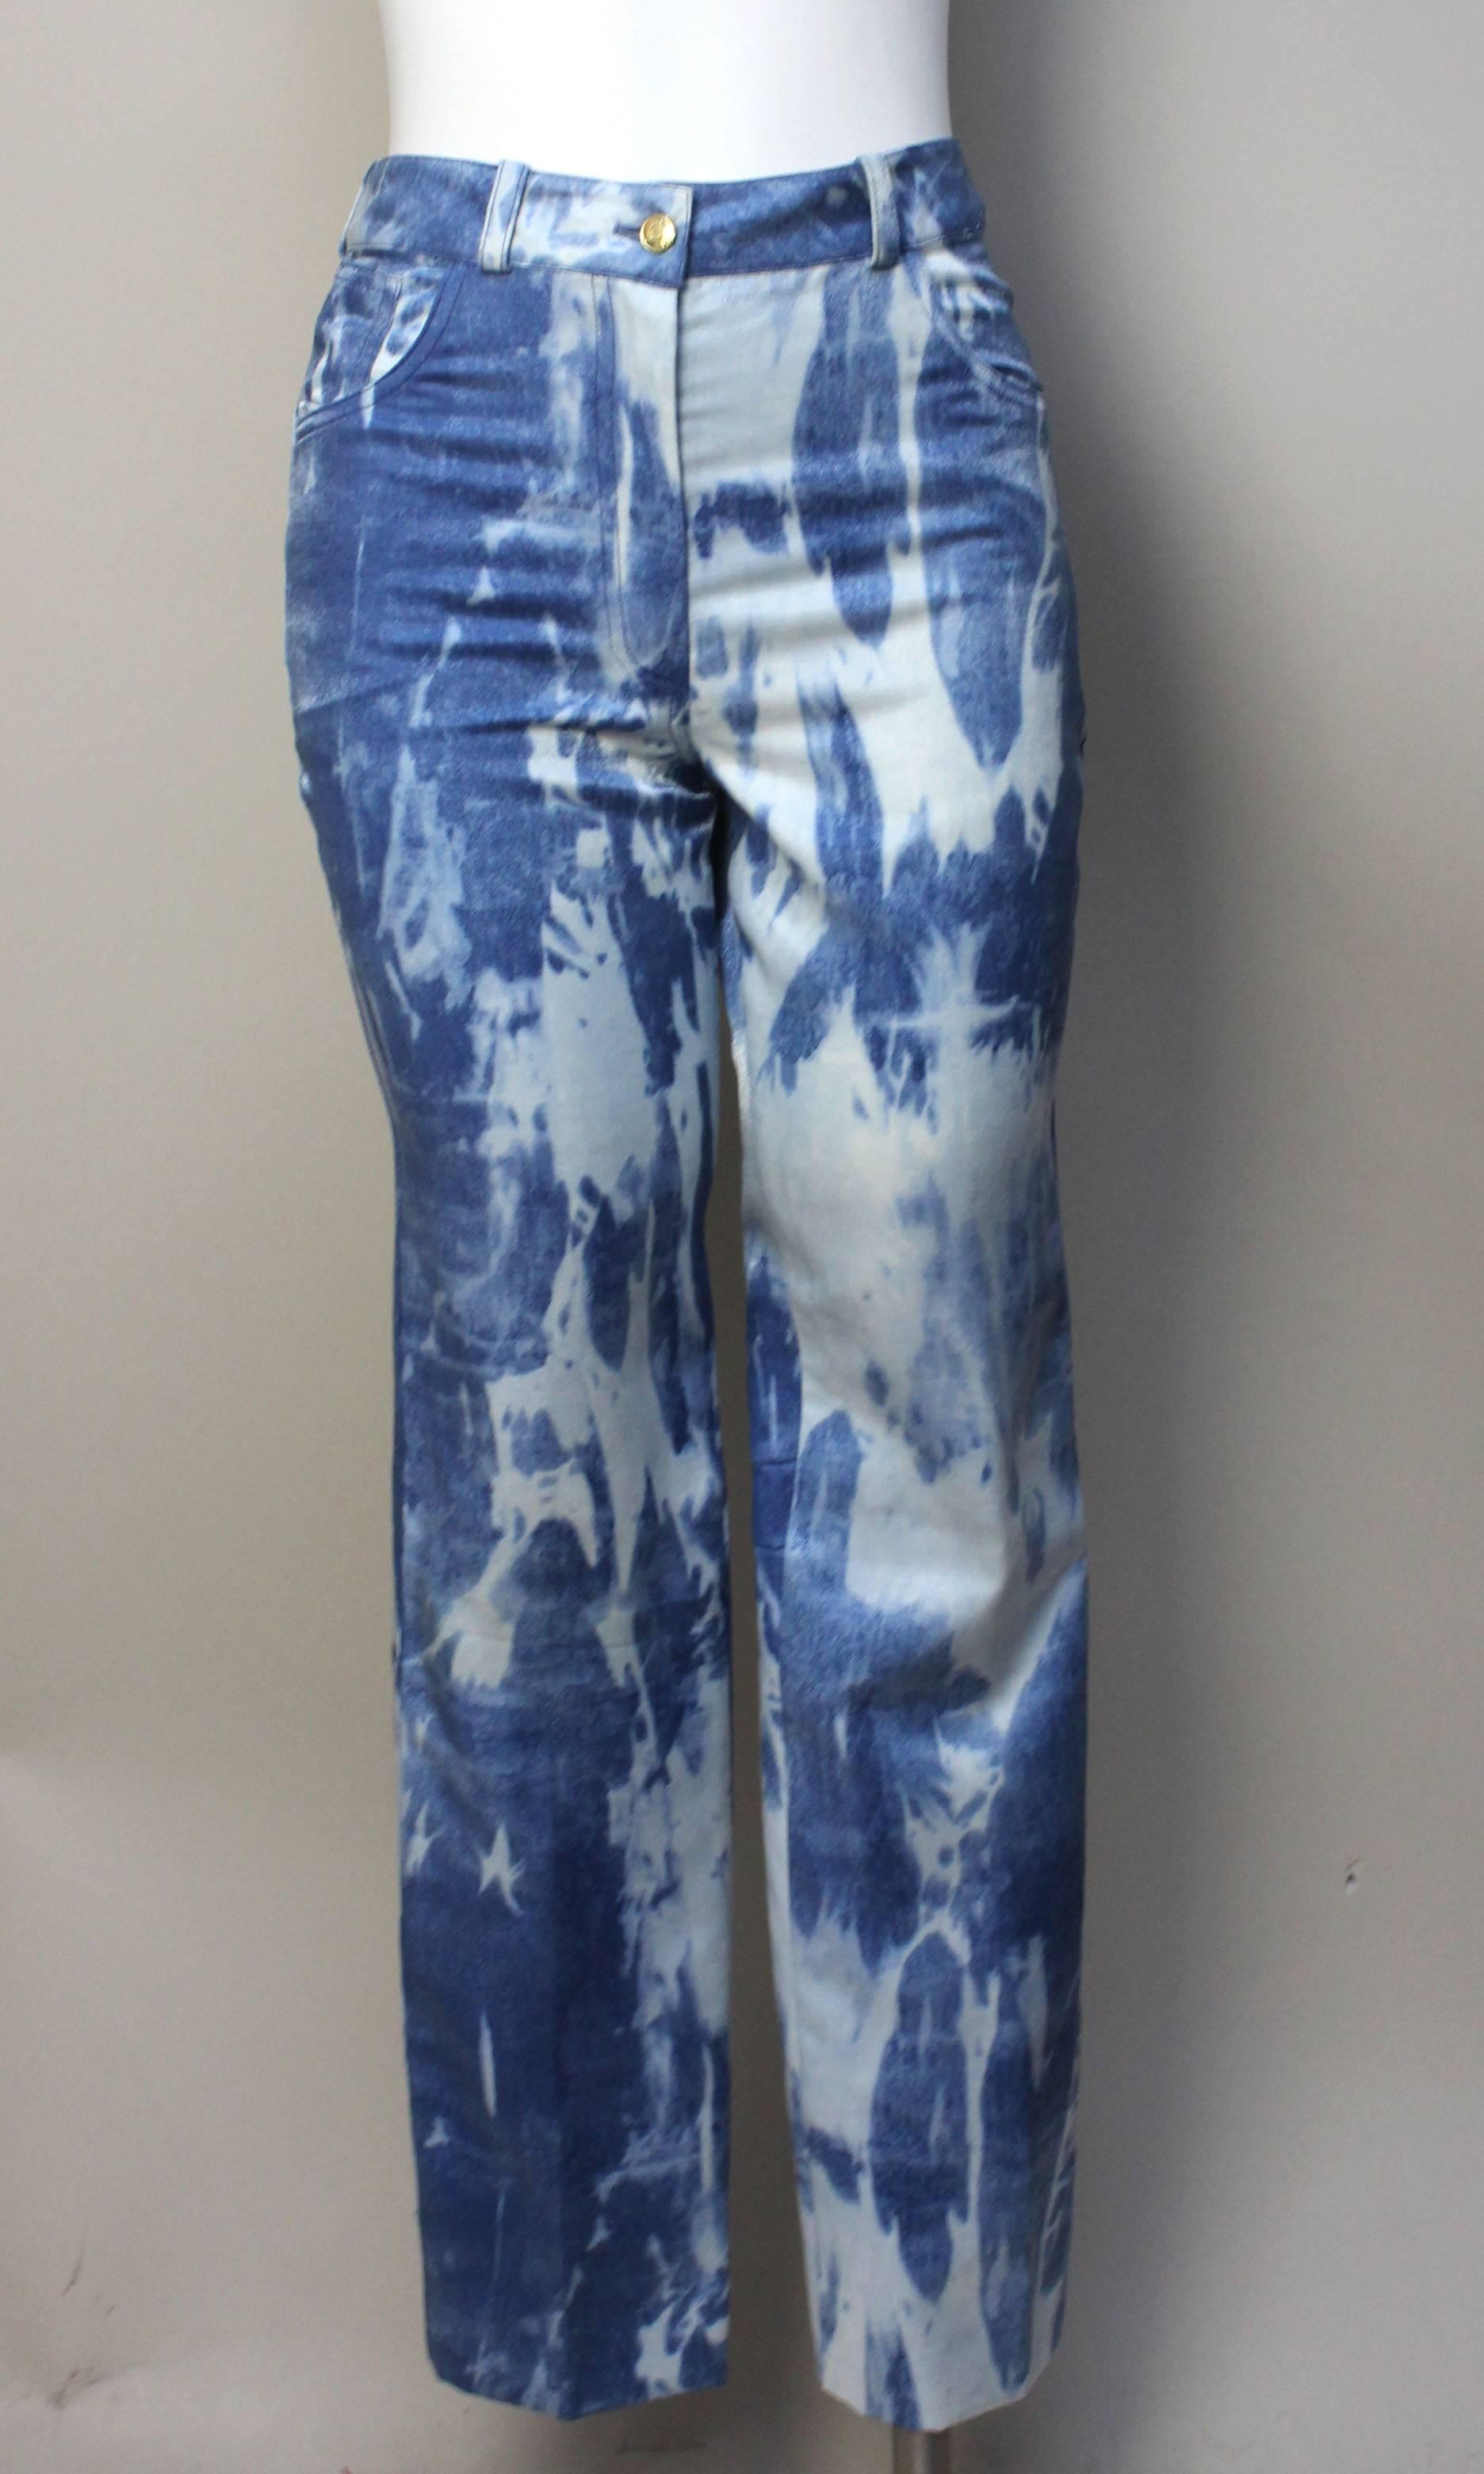 These pants are a clever twist on a traditional jean style. The fabric makes it an outstanding garment with a bleached effect on top of a fine metallic tropical rayon and wool blend. 